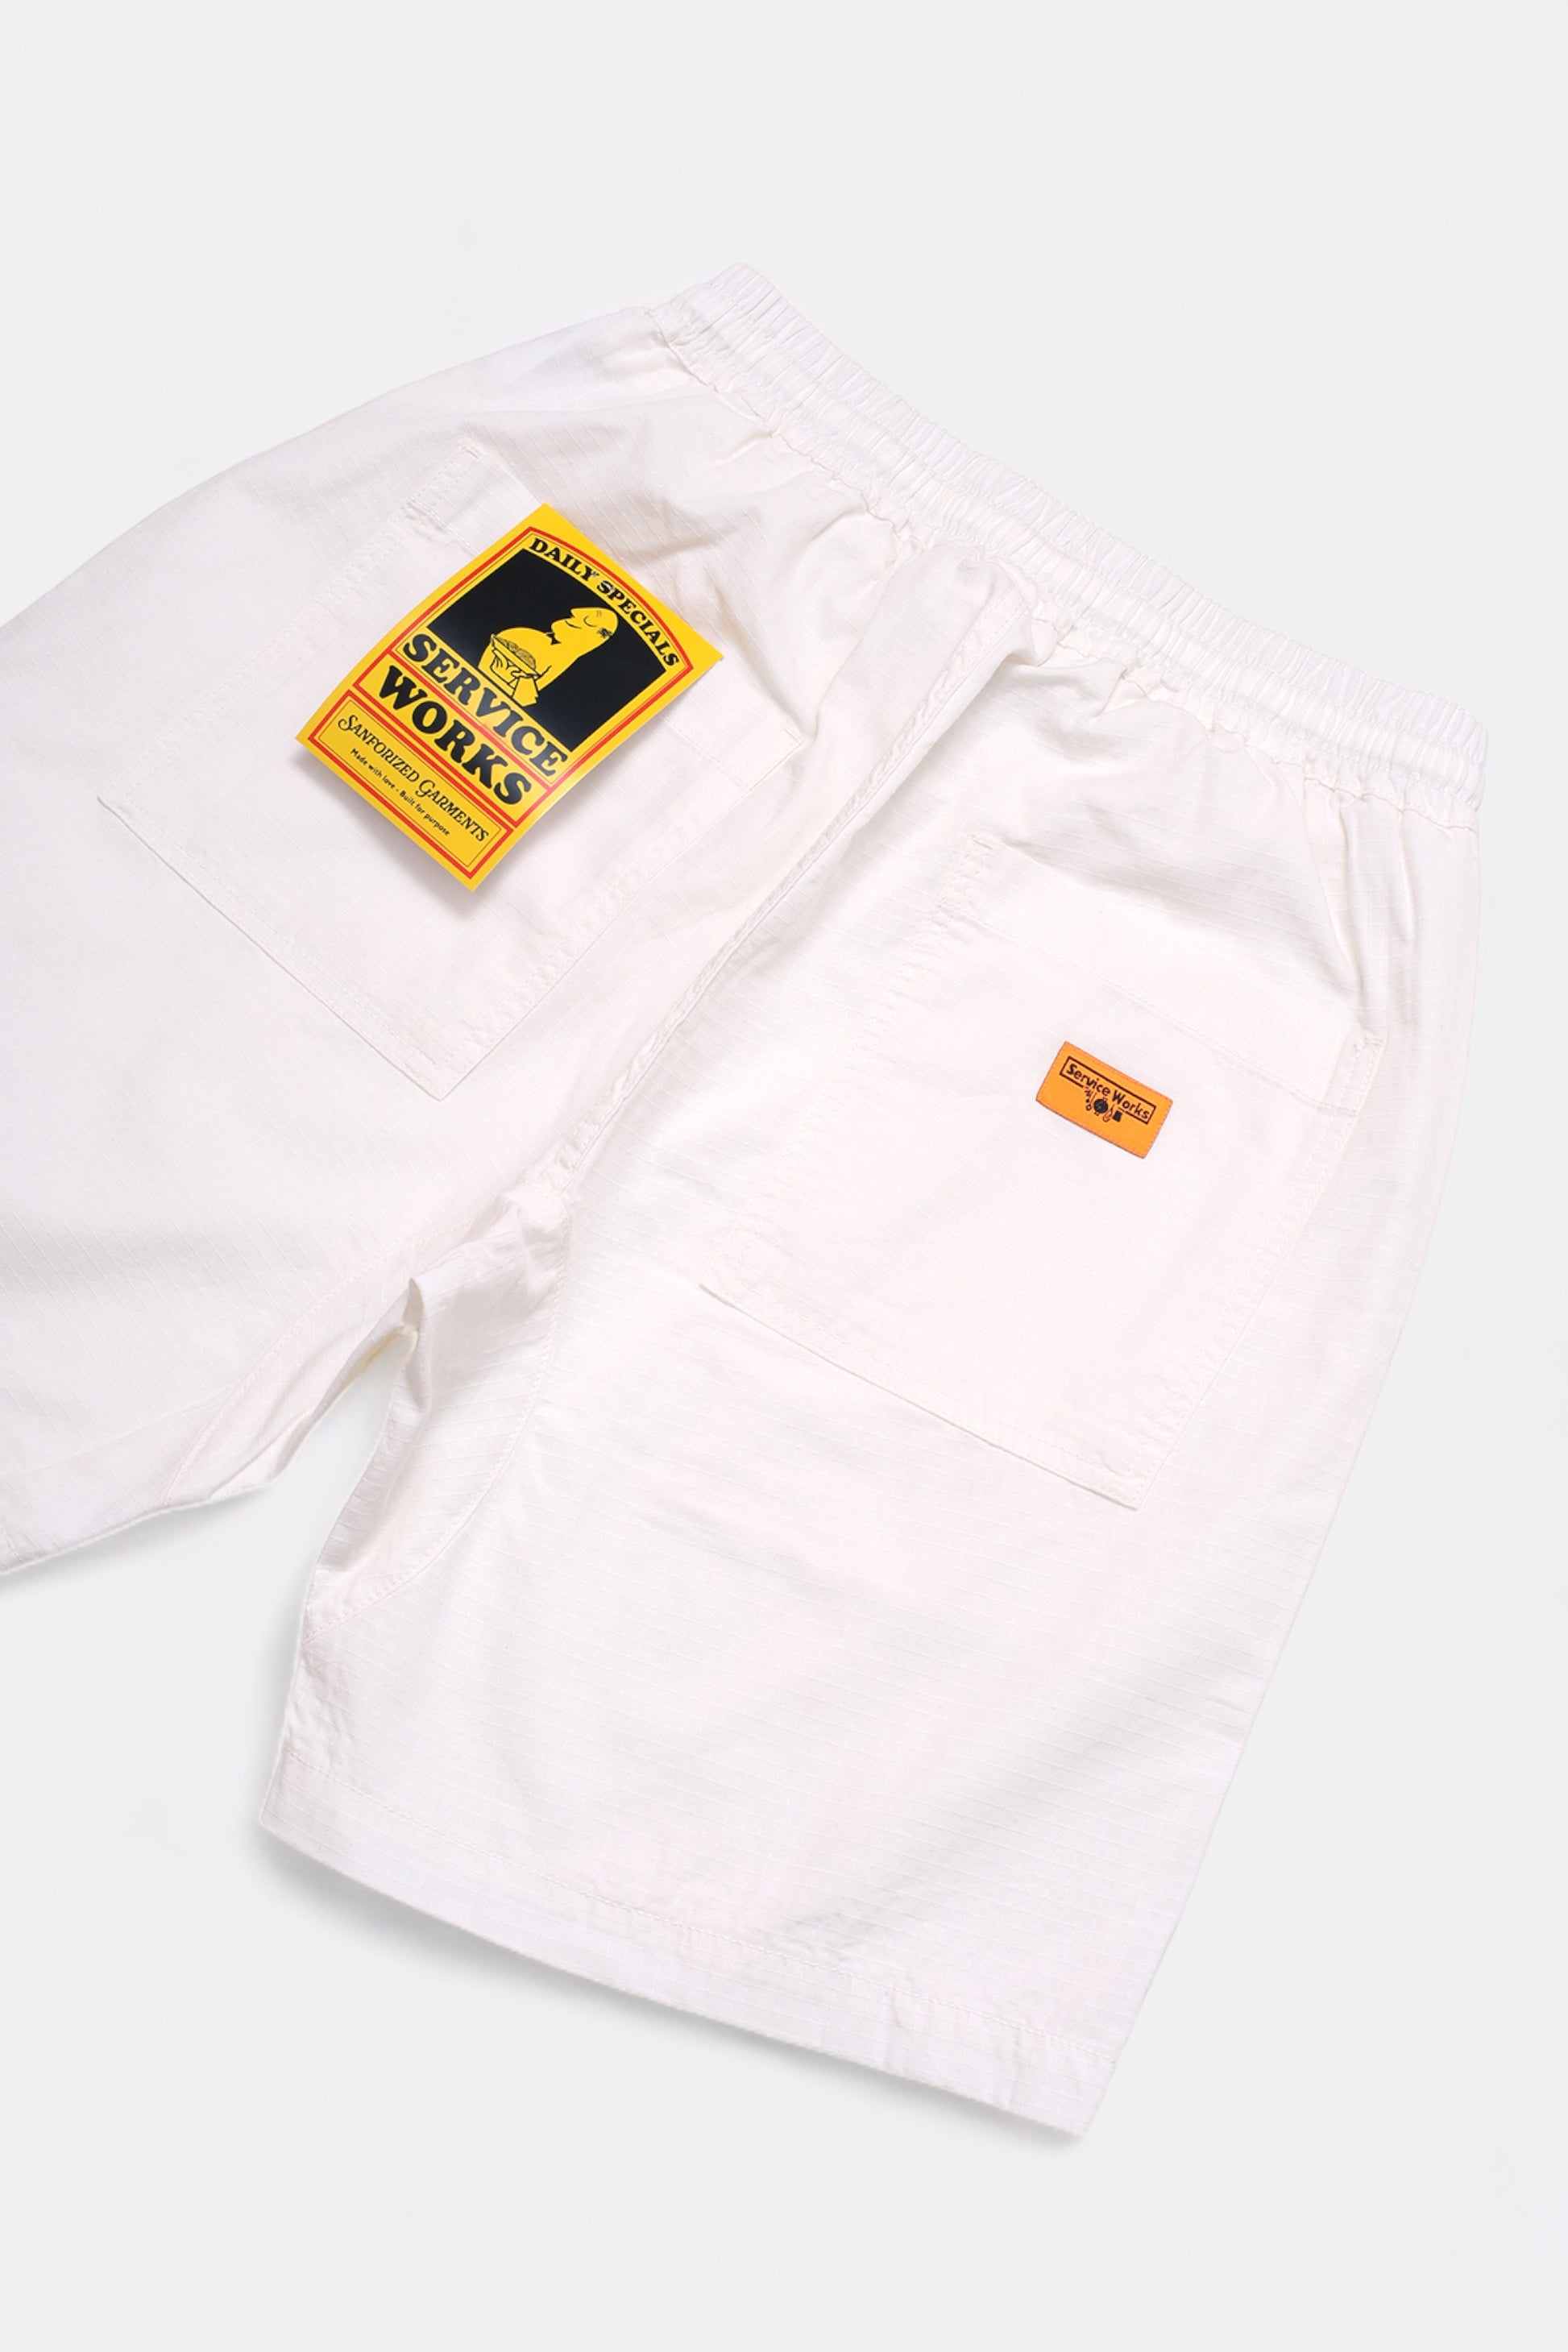 Service Works - Ripstop Chef Shorts (Off-White)